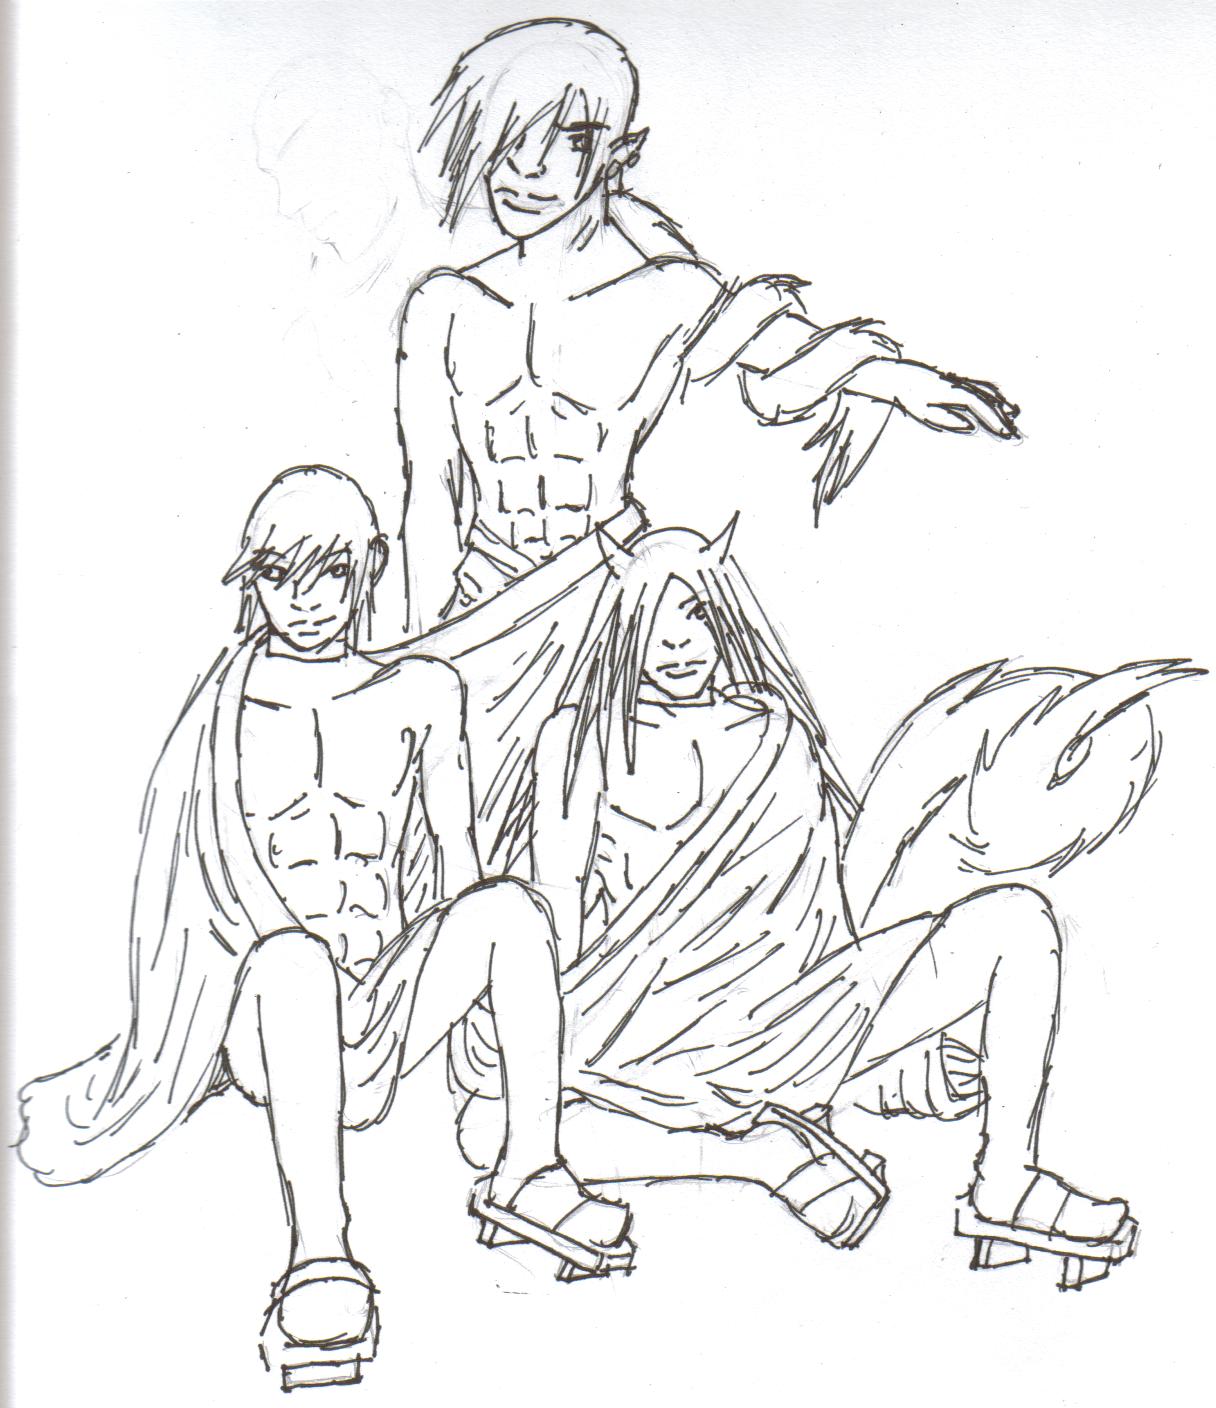 Three Guys in a blanket for Blackpiant by MJW4ever